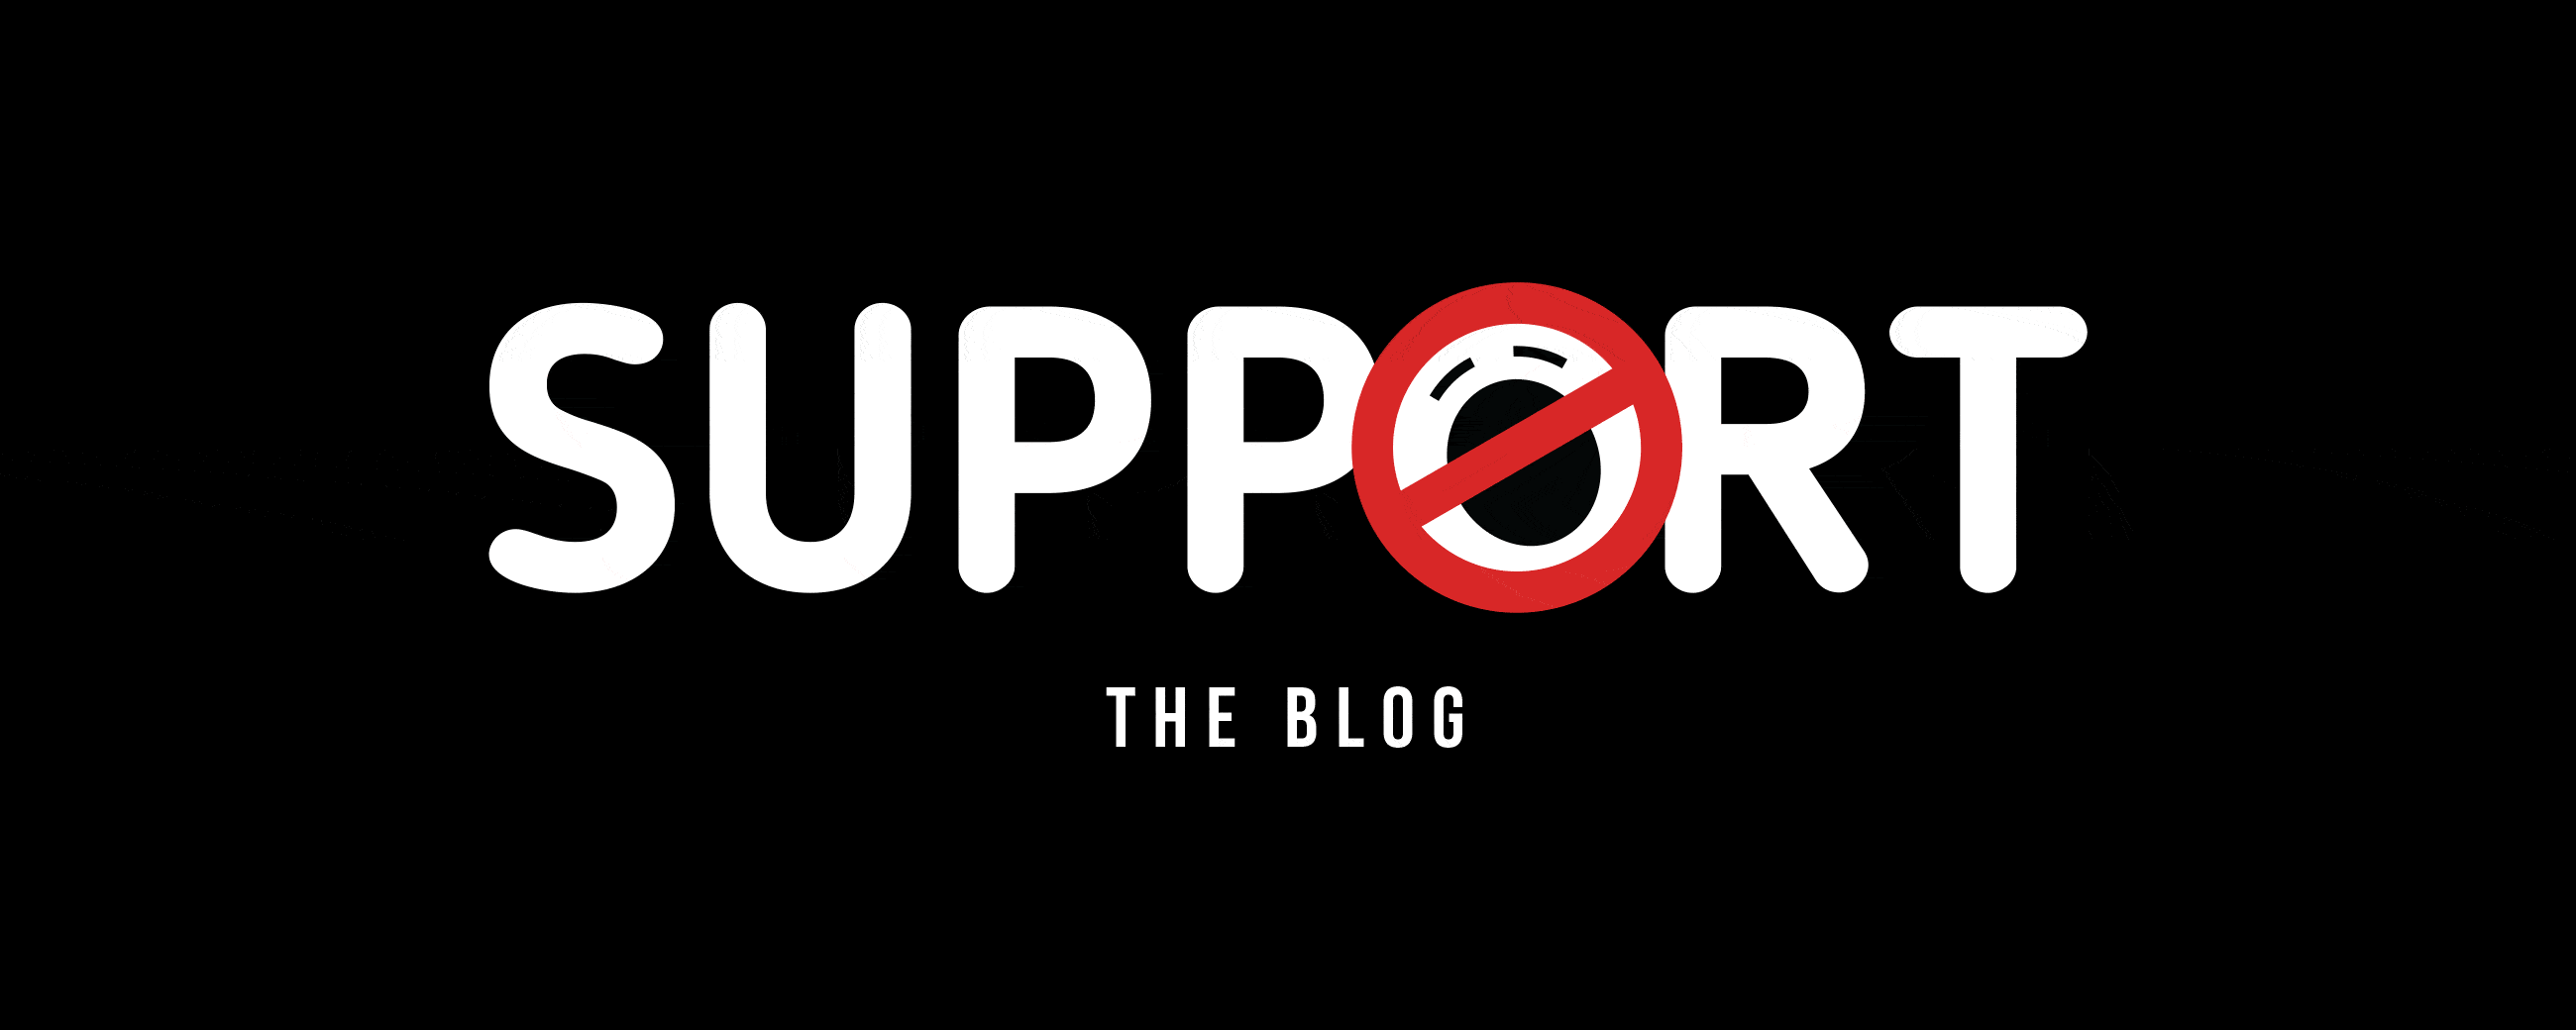 Support the blog!